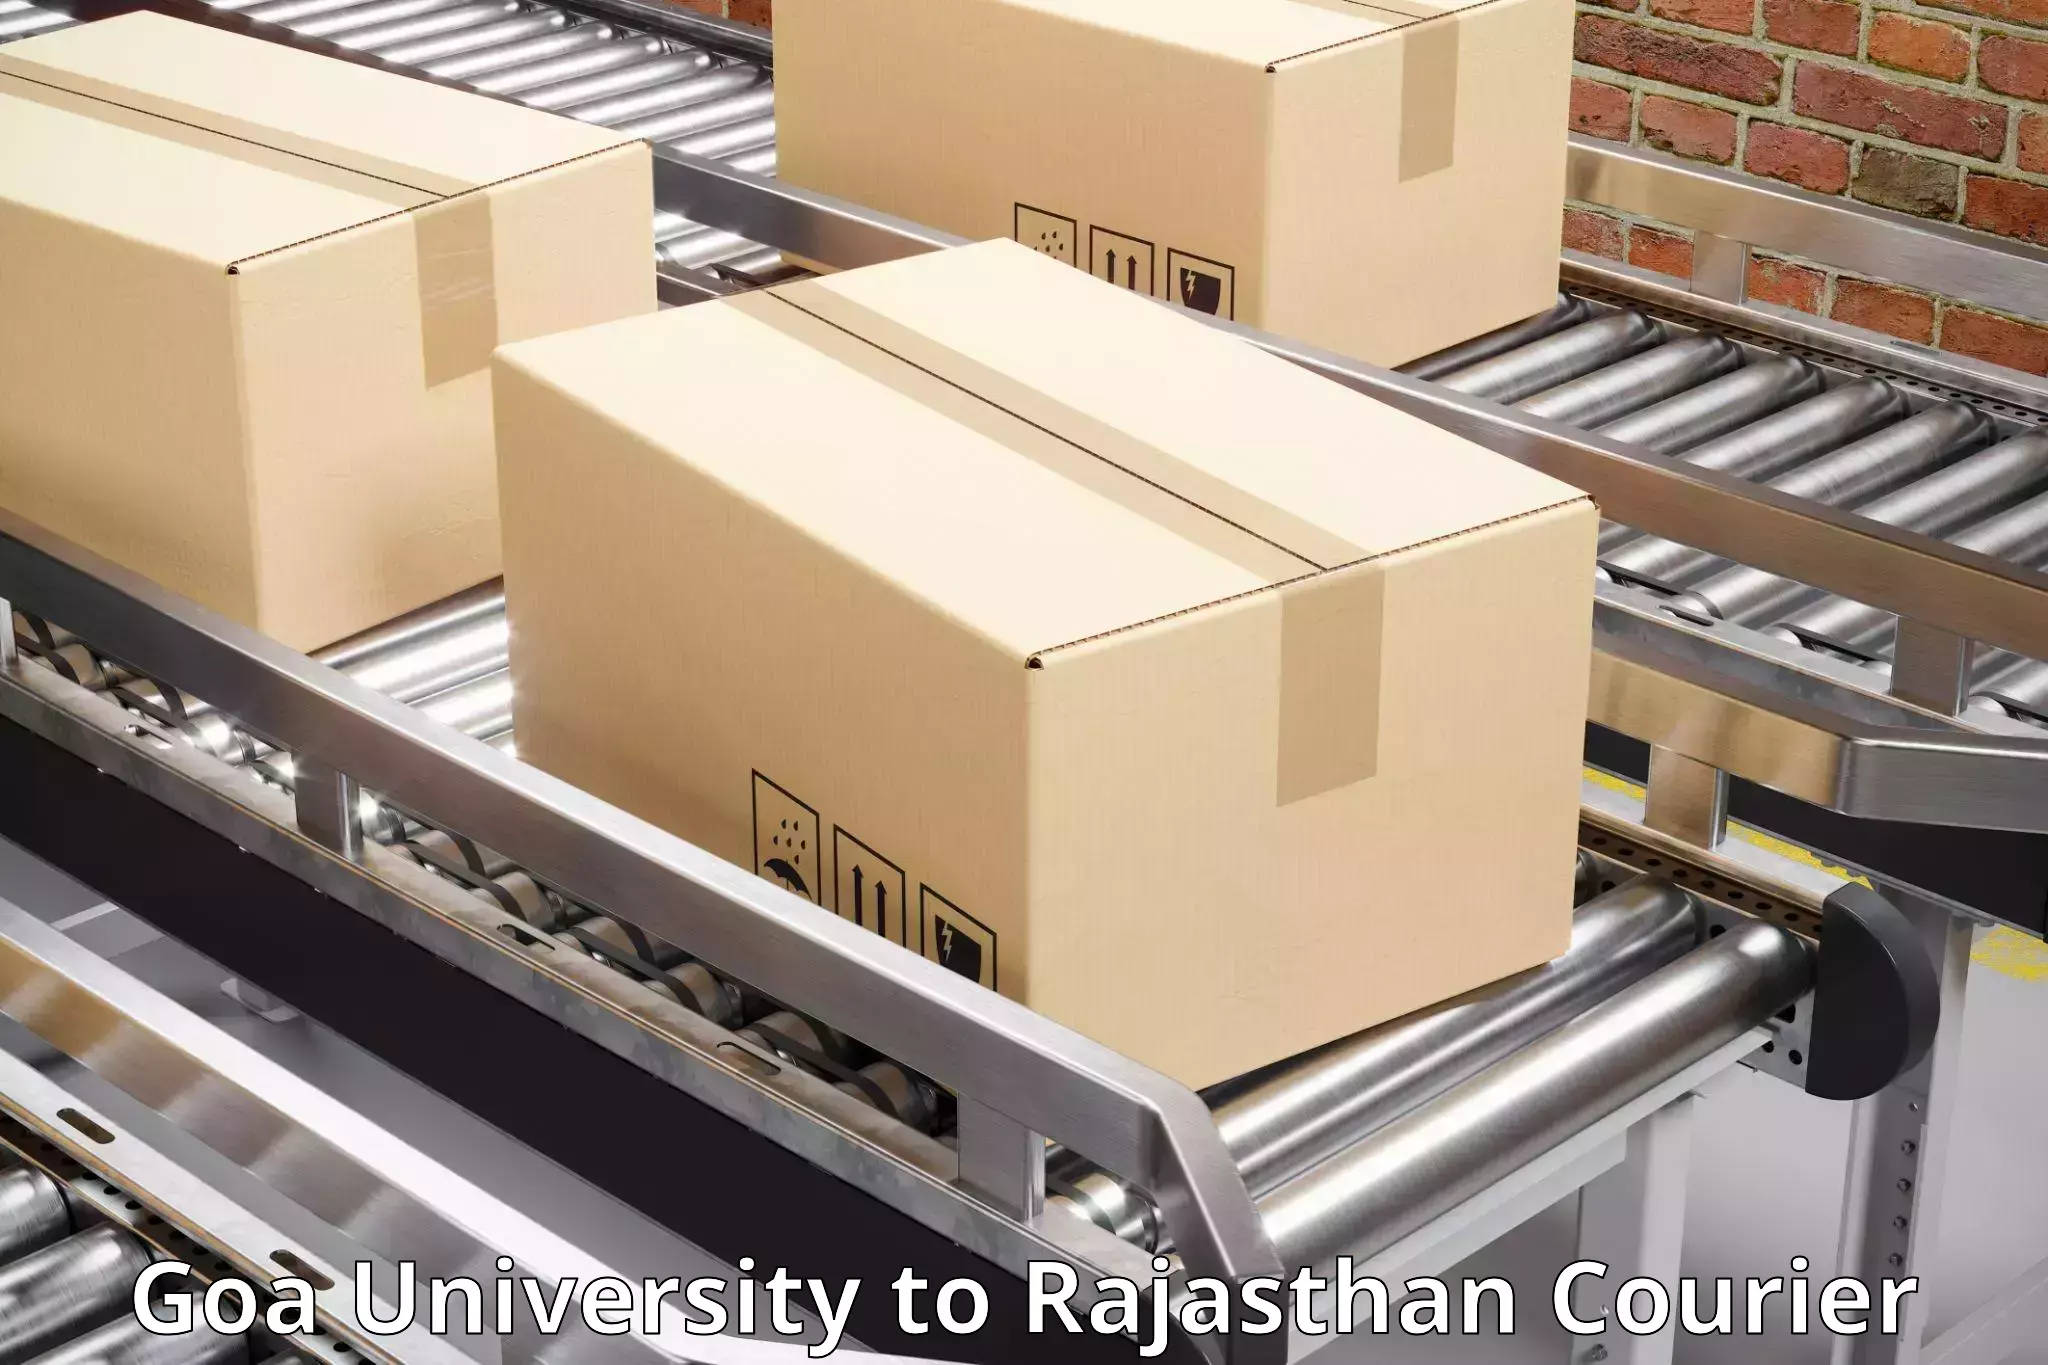 Corporate courier solutions Goa University to Chittorgarh